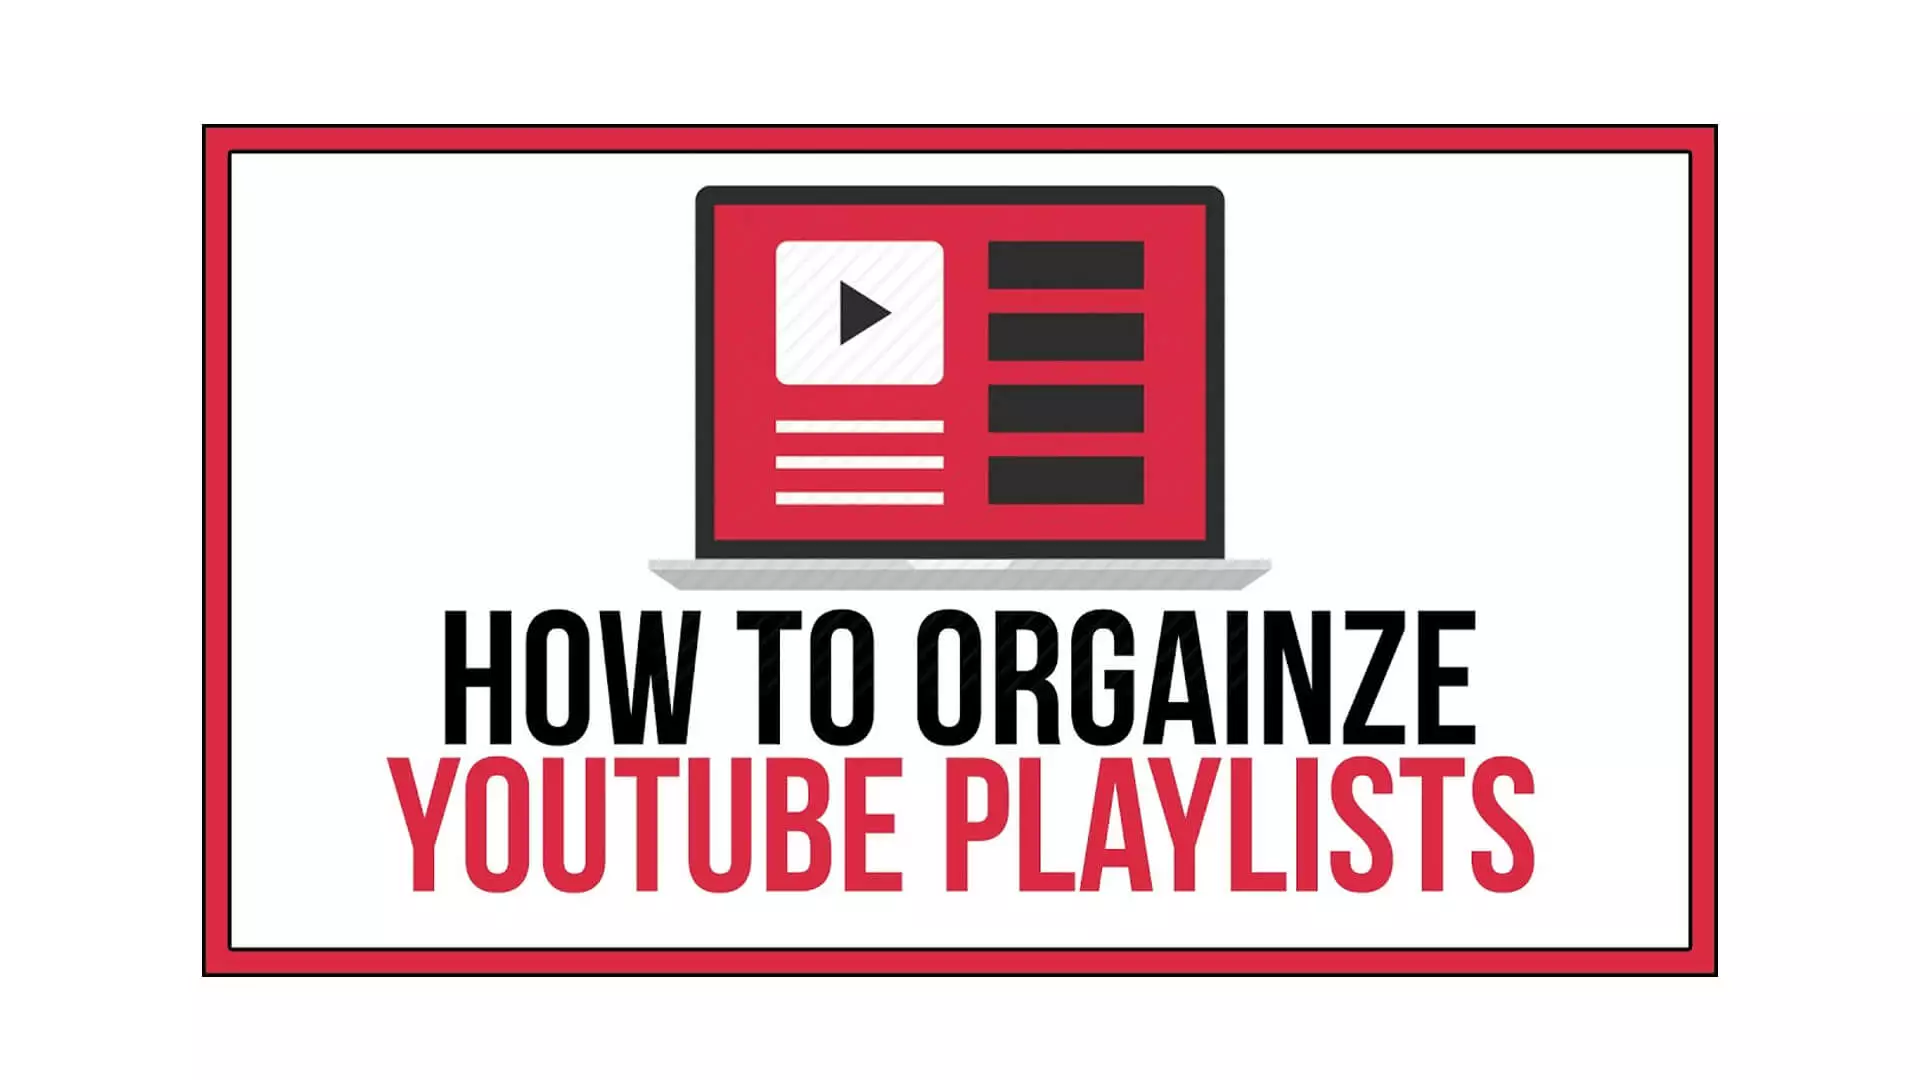 Organize your videos into playlist